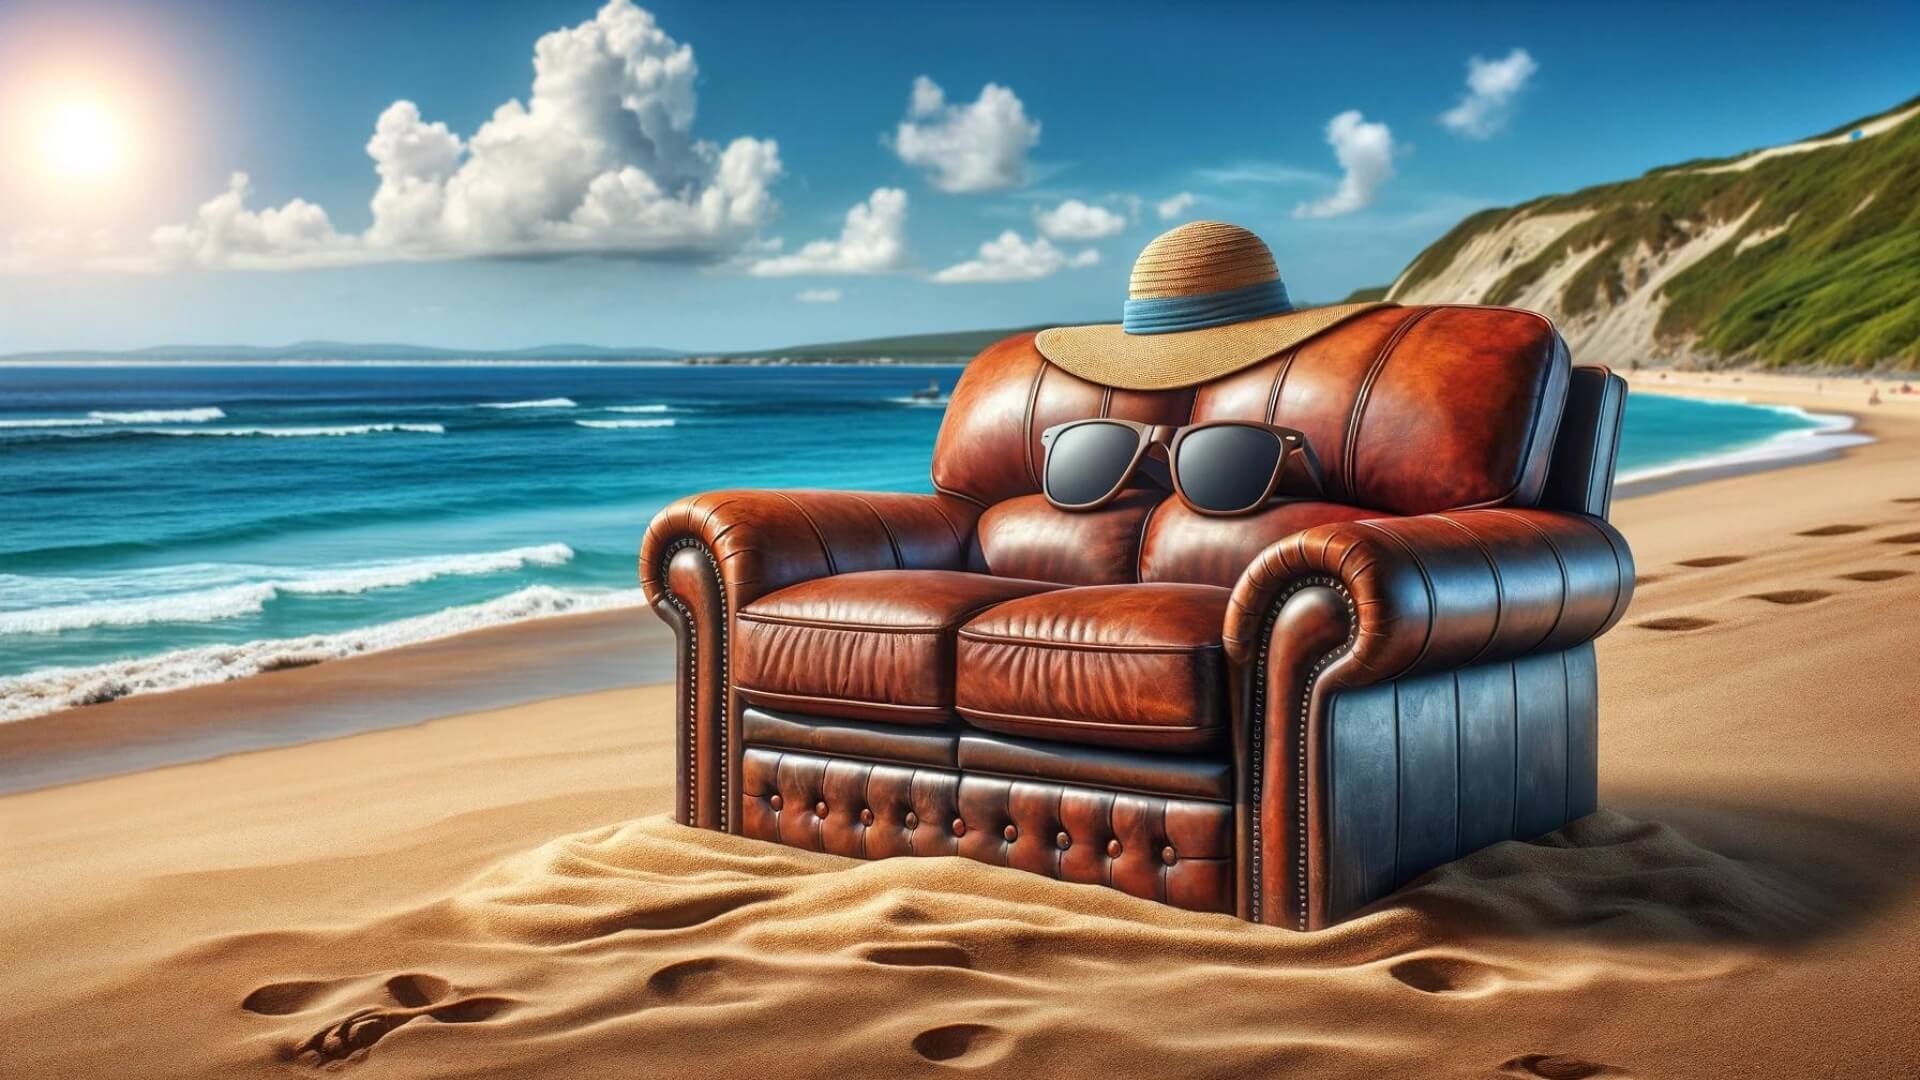 a couch personified with sunglasses and a hat enjoys some rays at the beach